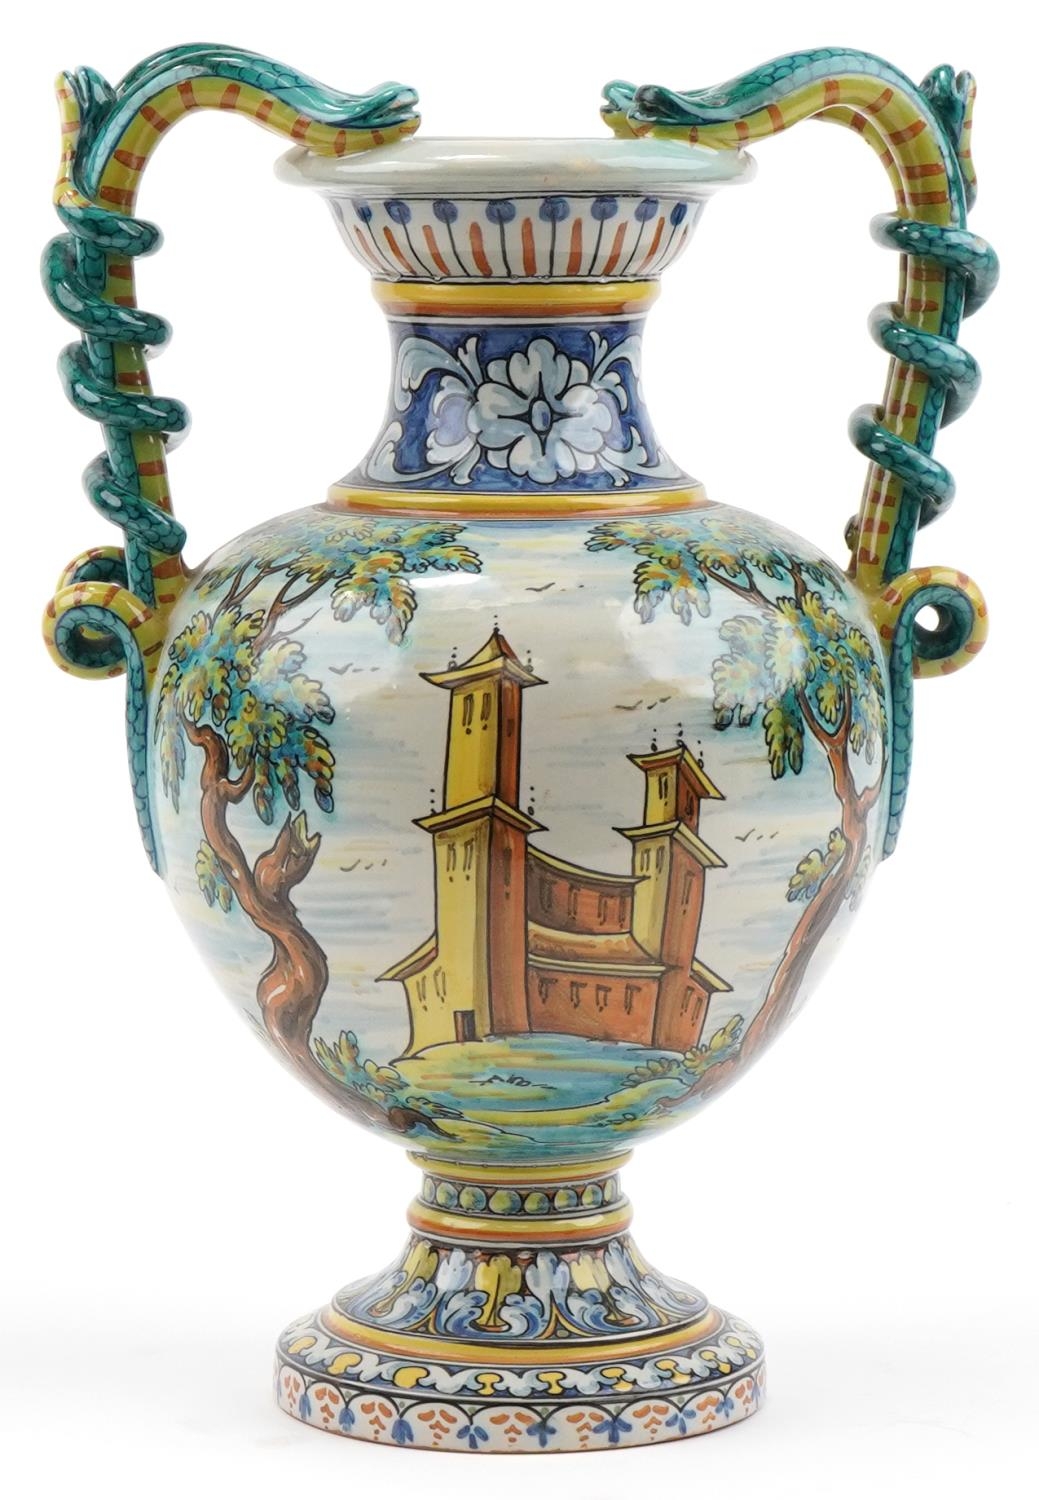 Talevera, large Spanish Maiolica vase with twin serpent handles hand painted with a mythical bird in